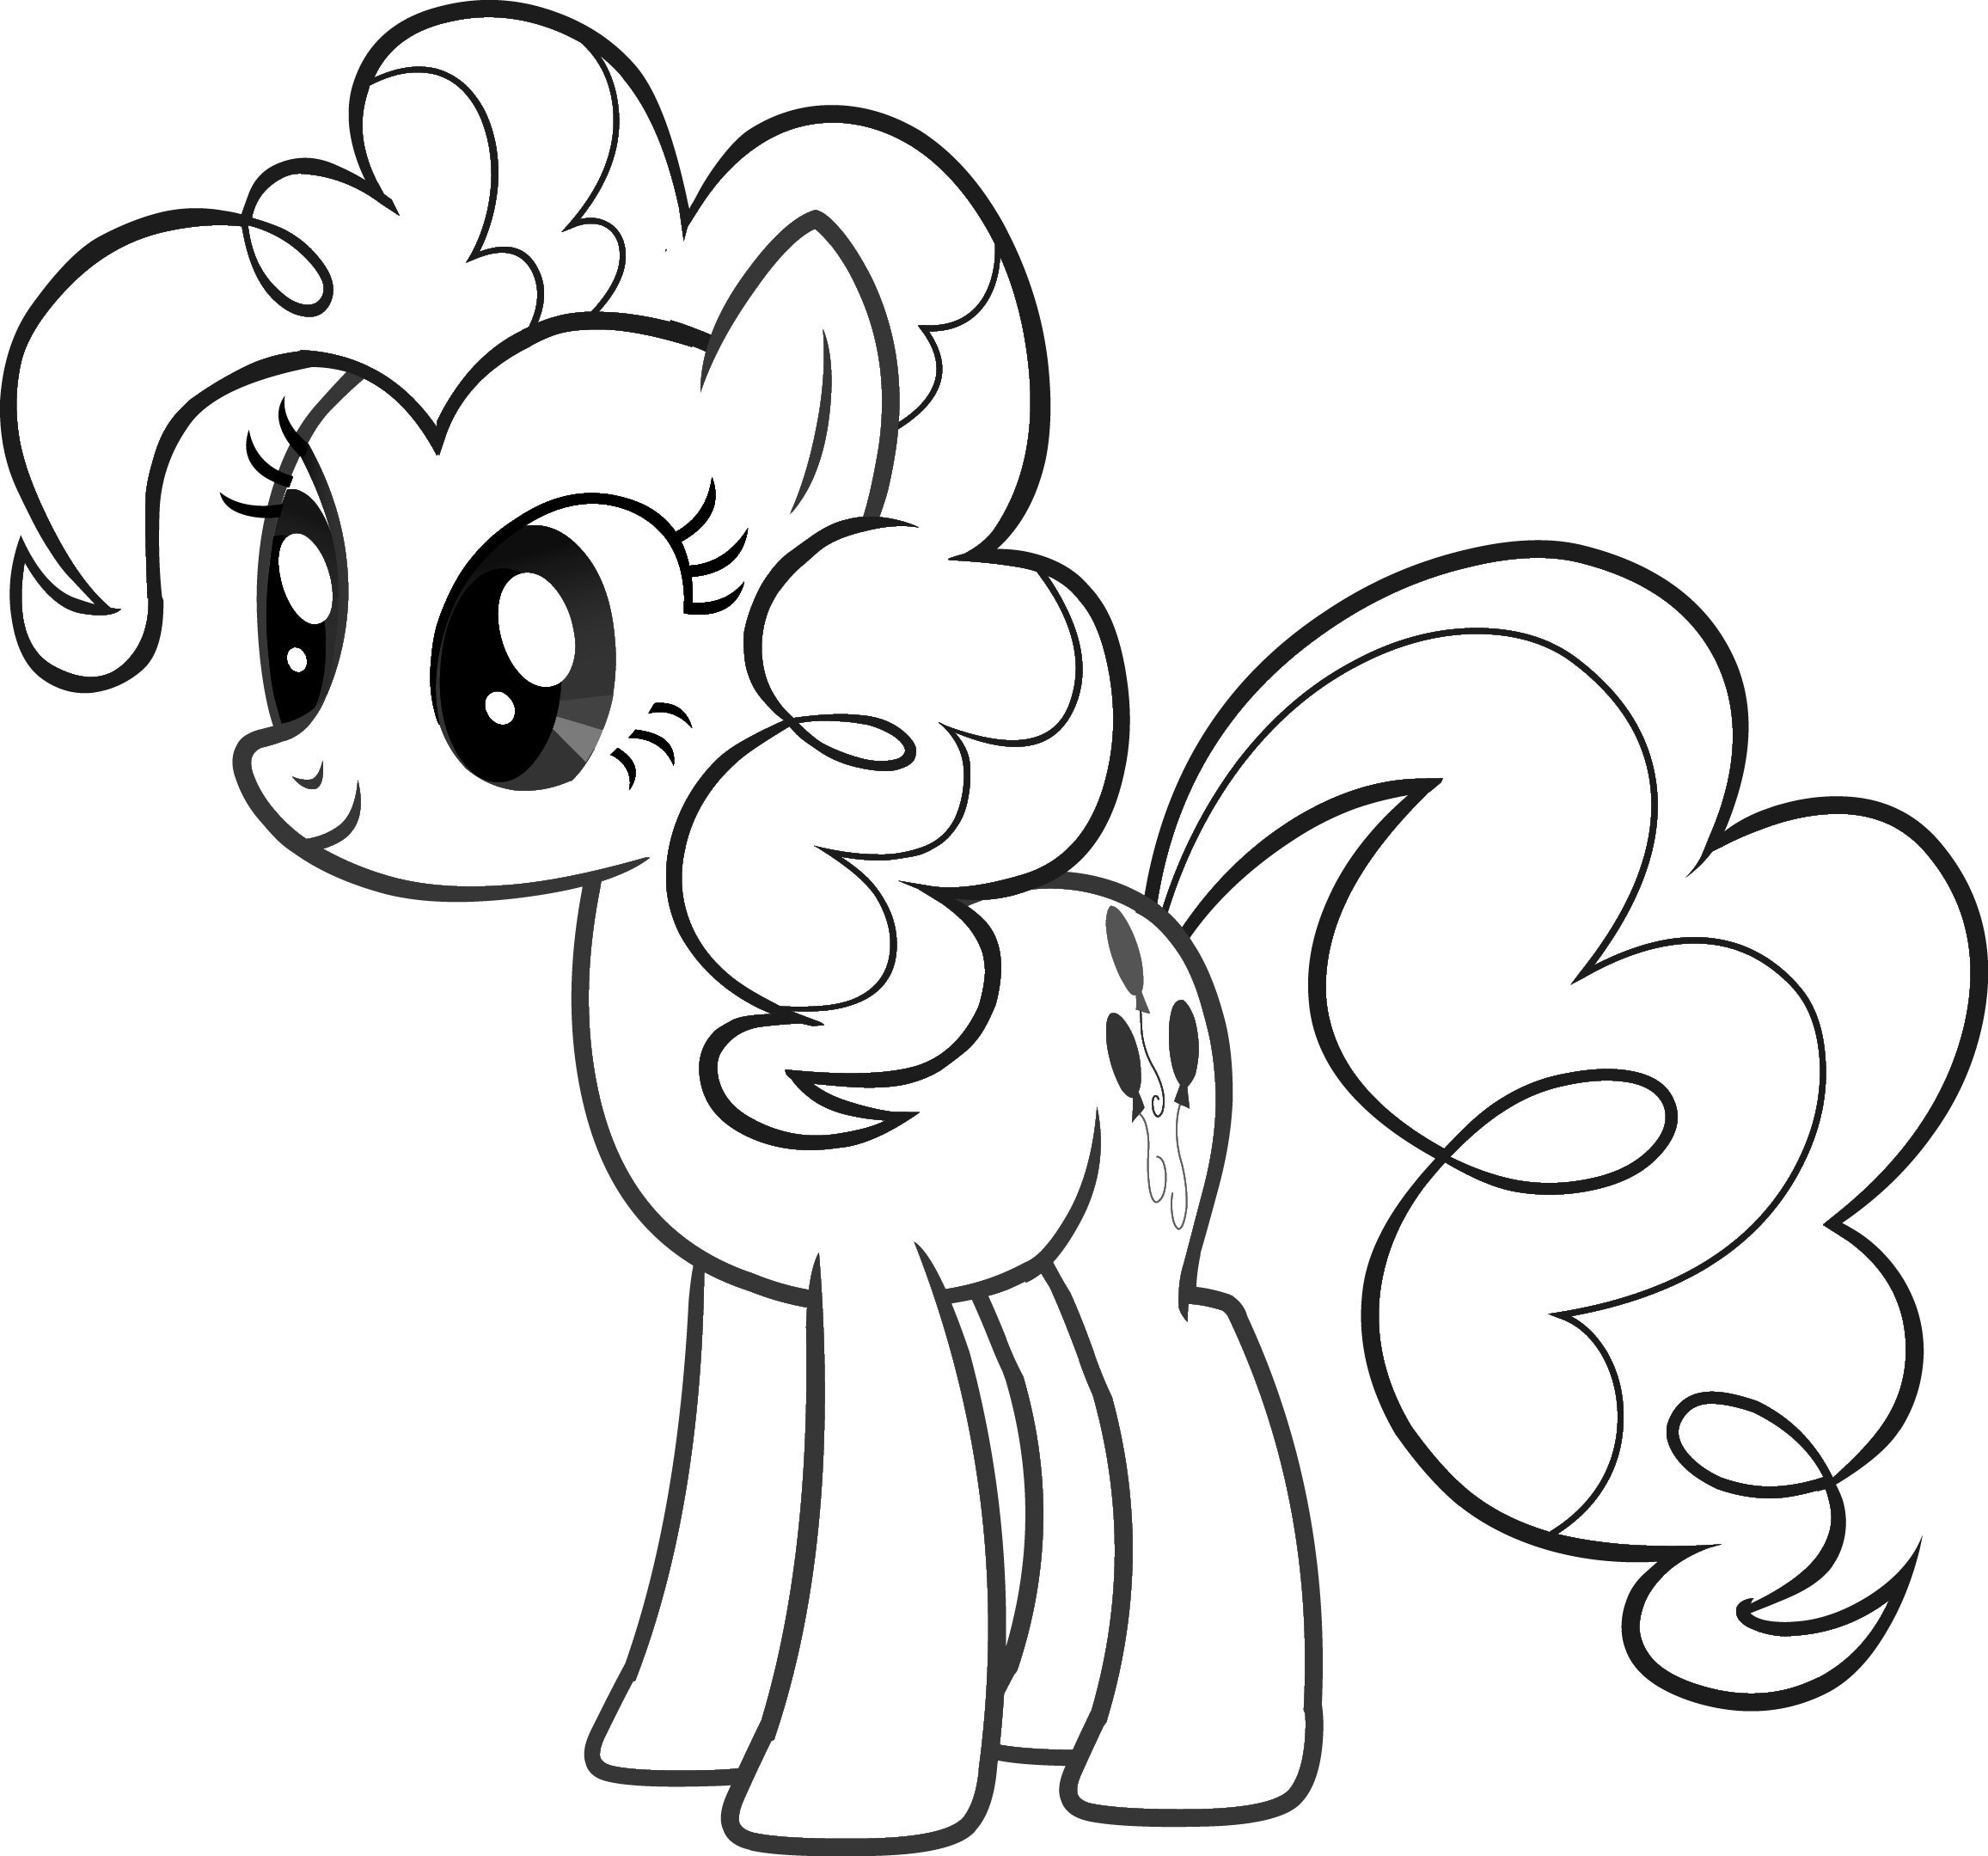 Coloring Books For Little Girls
 My little pony coloring pages